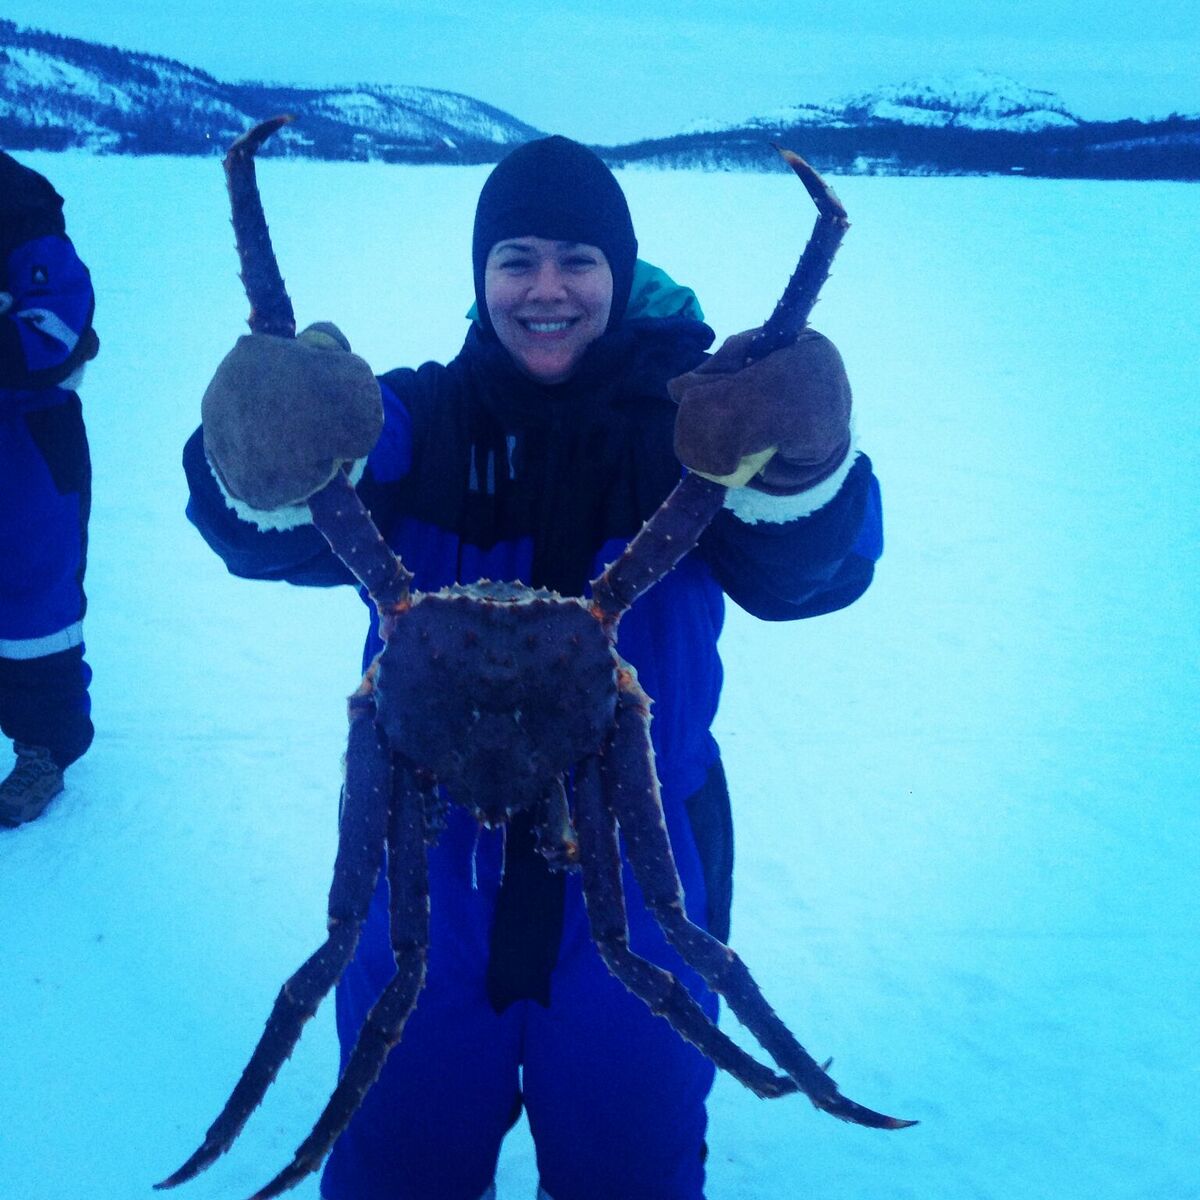 Colleen holds a King Crab up to the camera in front of a snowy scene